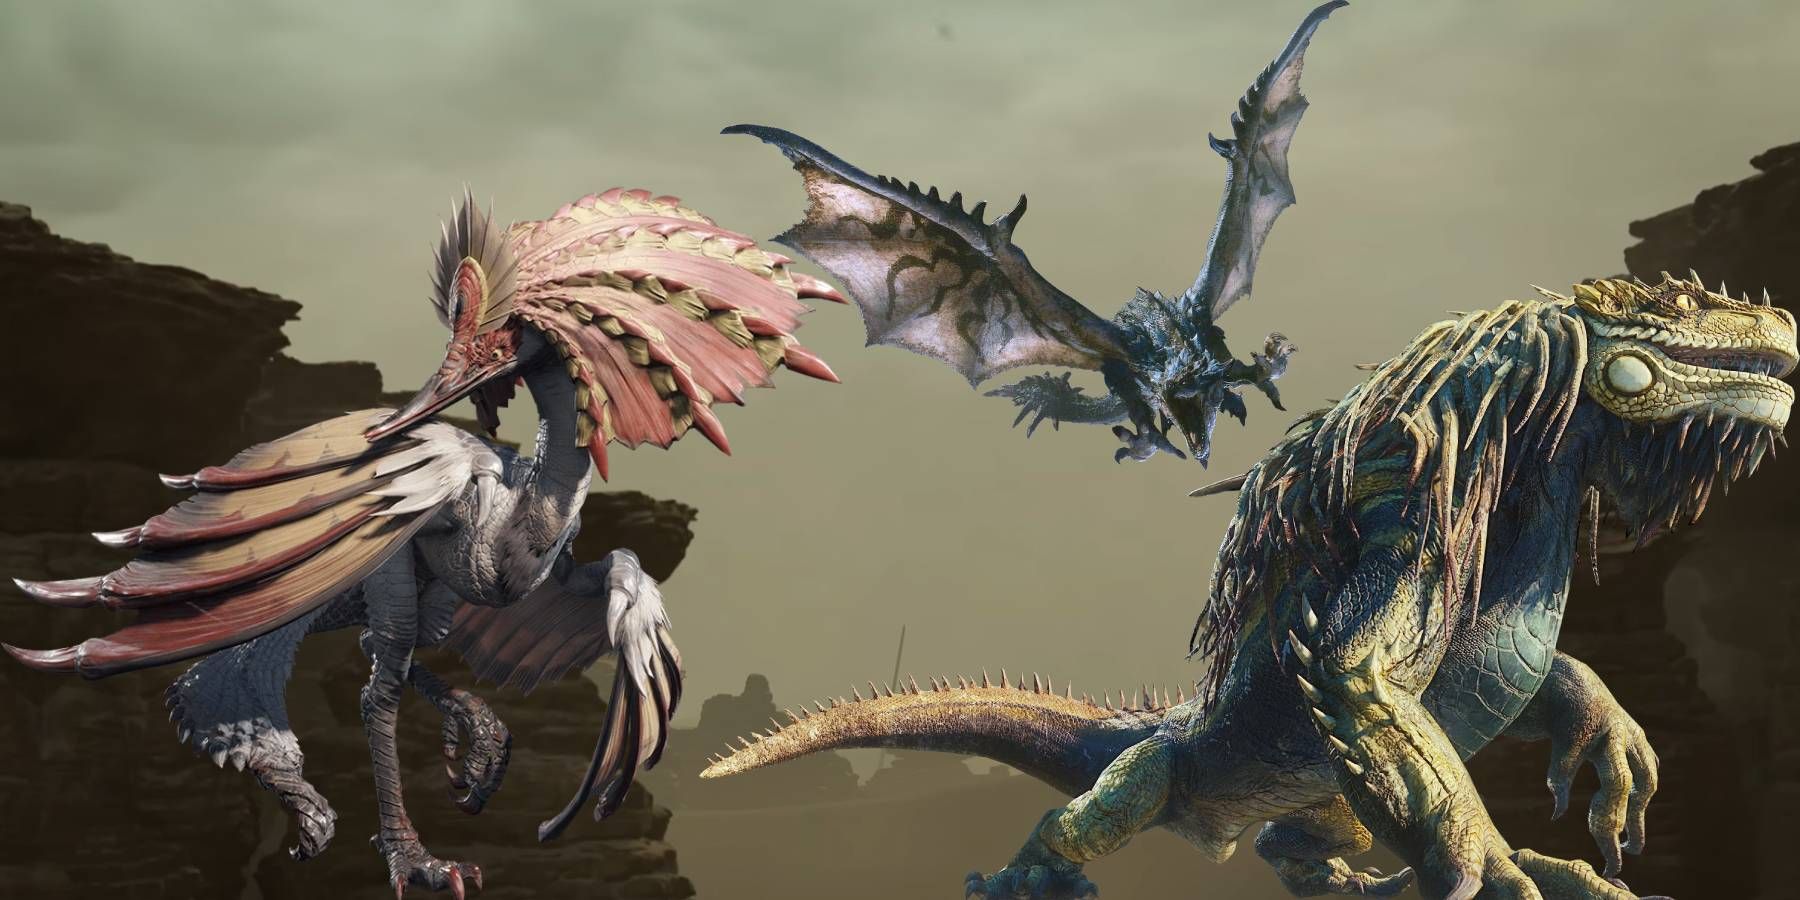 Aknosom, Azure Rathalos, and Great Jagras over a shot from Monster Hunter Wilds' trailer